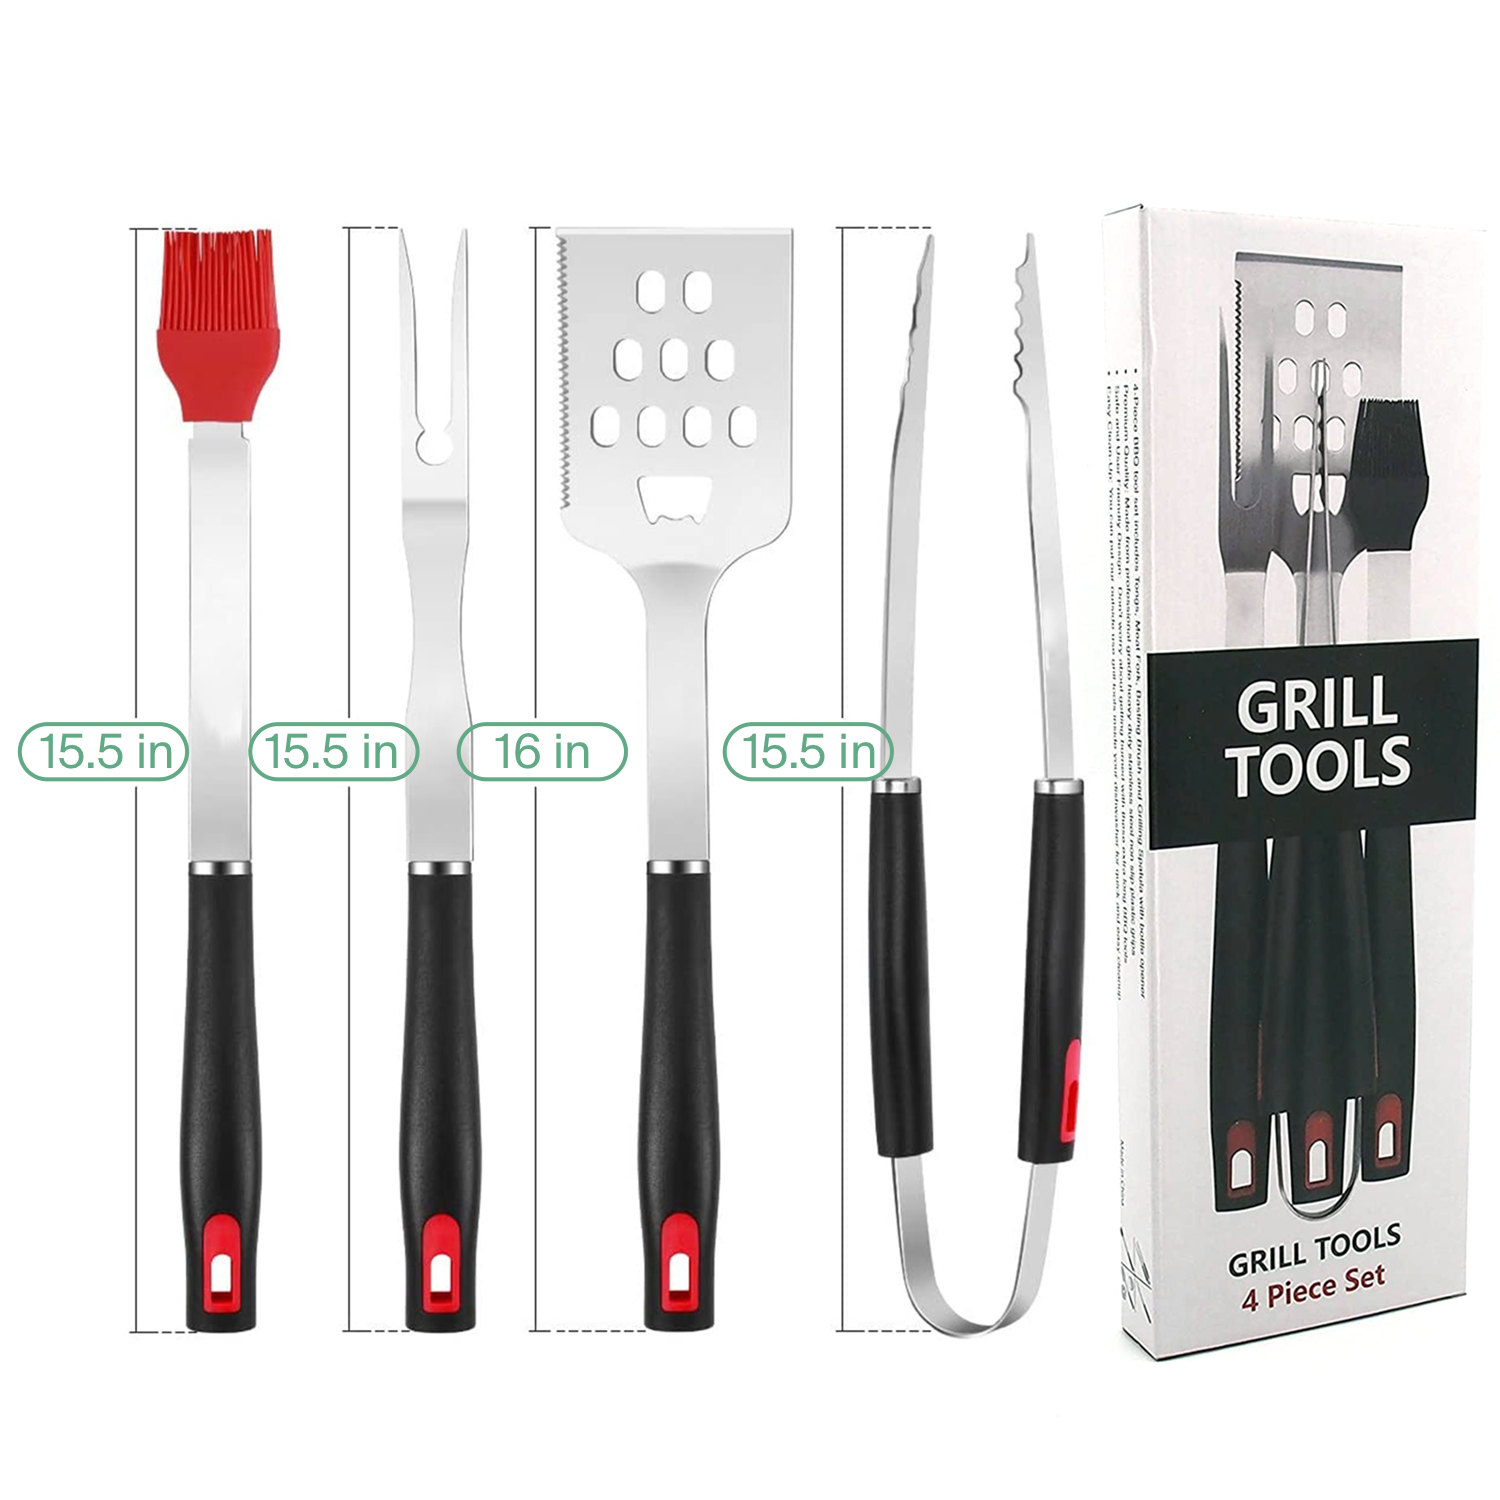 4 Piece BBQ Tool Set for Outdoor Barbecue Grilling (4 Piece Set) - image 4 of 9